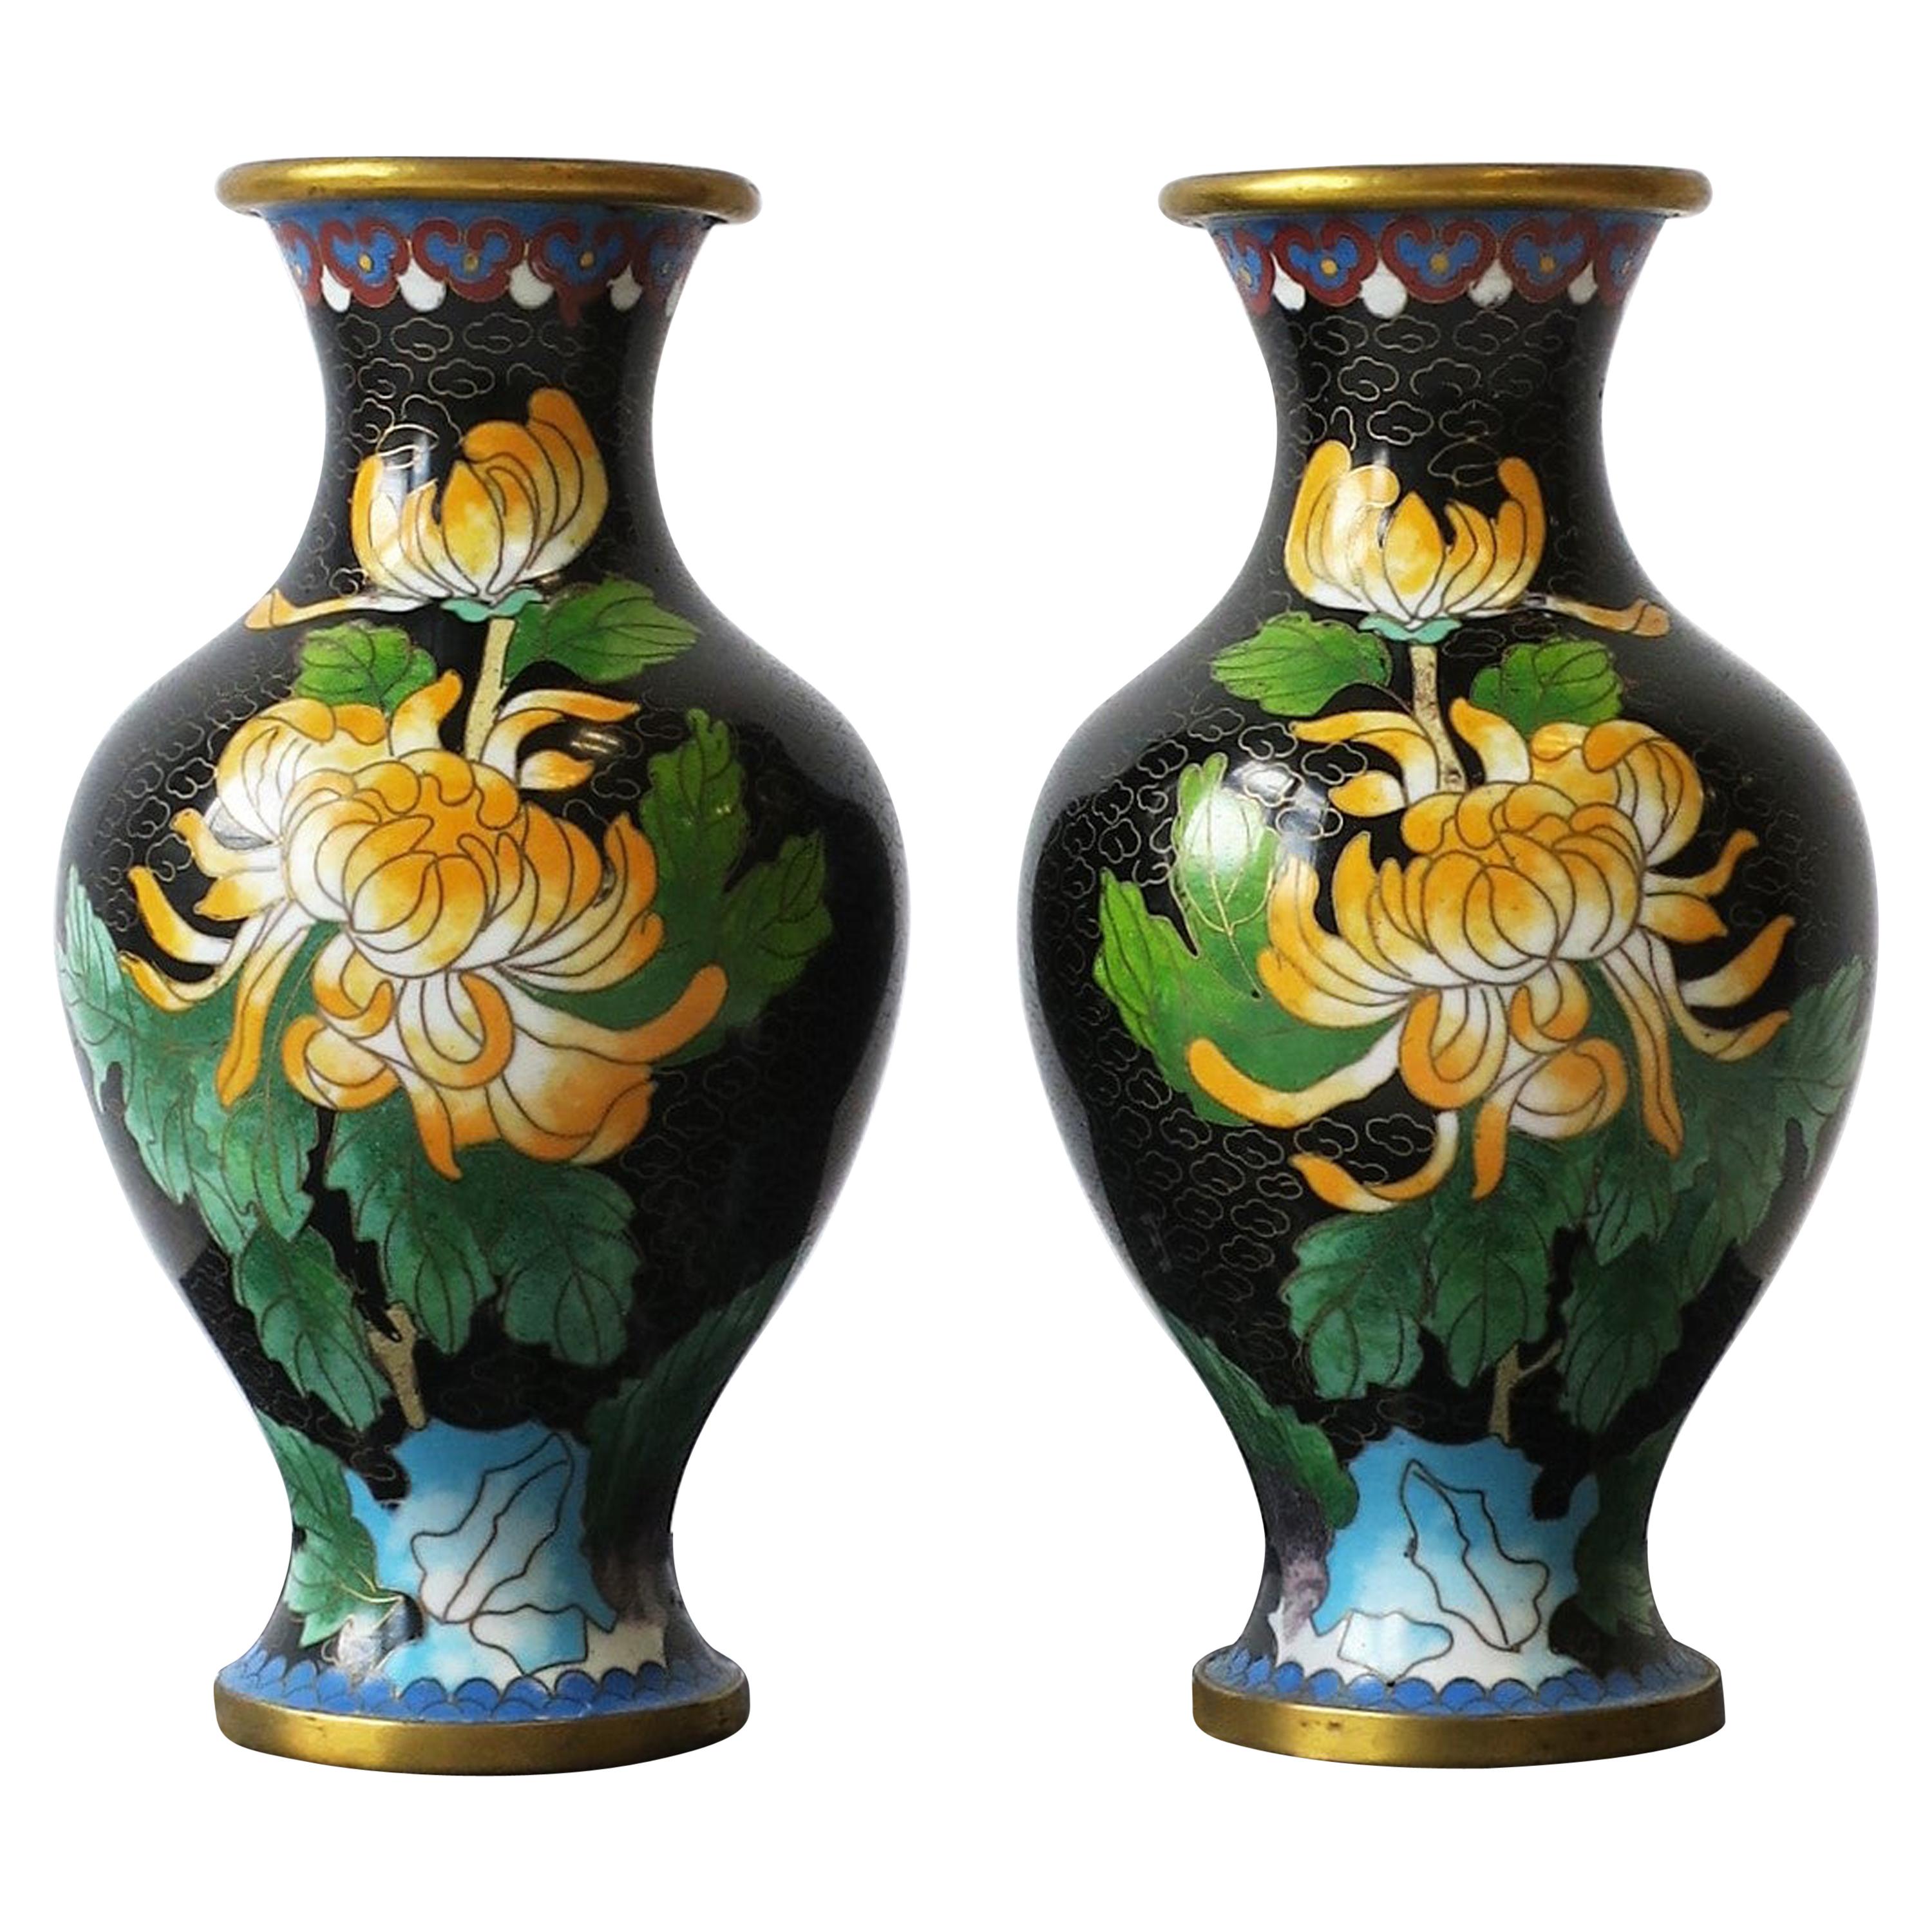 Black and Green Cloisonné́ Enamel and Brass Flower Vases, Pair For Sale